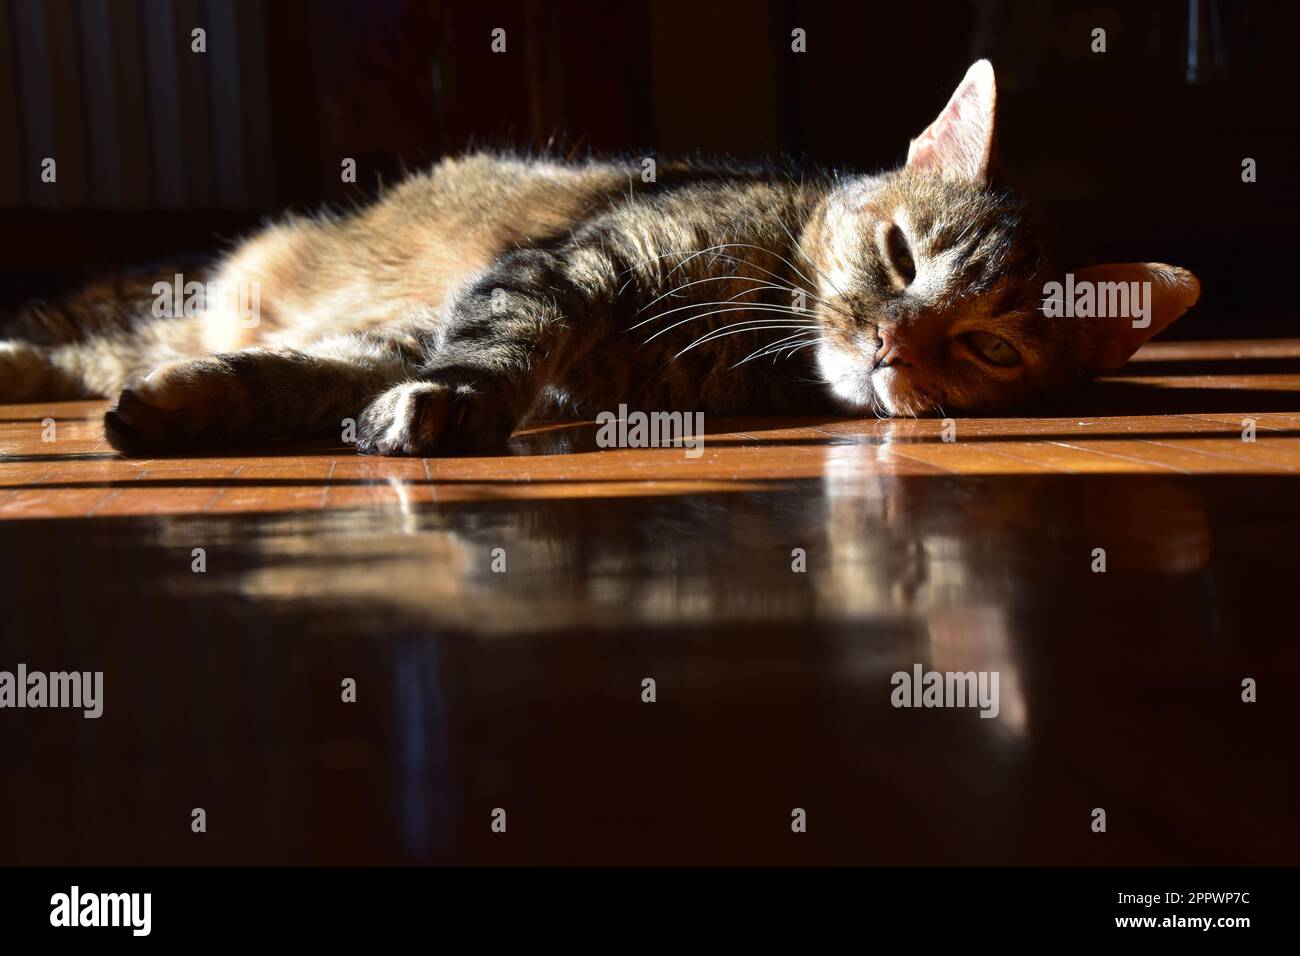 Close-up of a tabby cat lying on a floor in sunlight Stock Photo